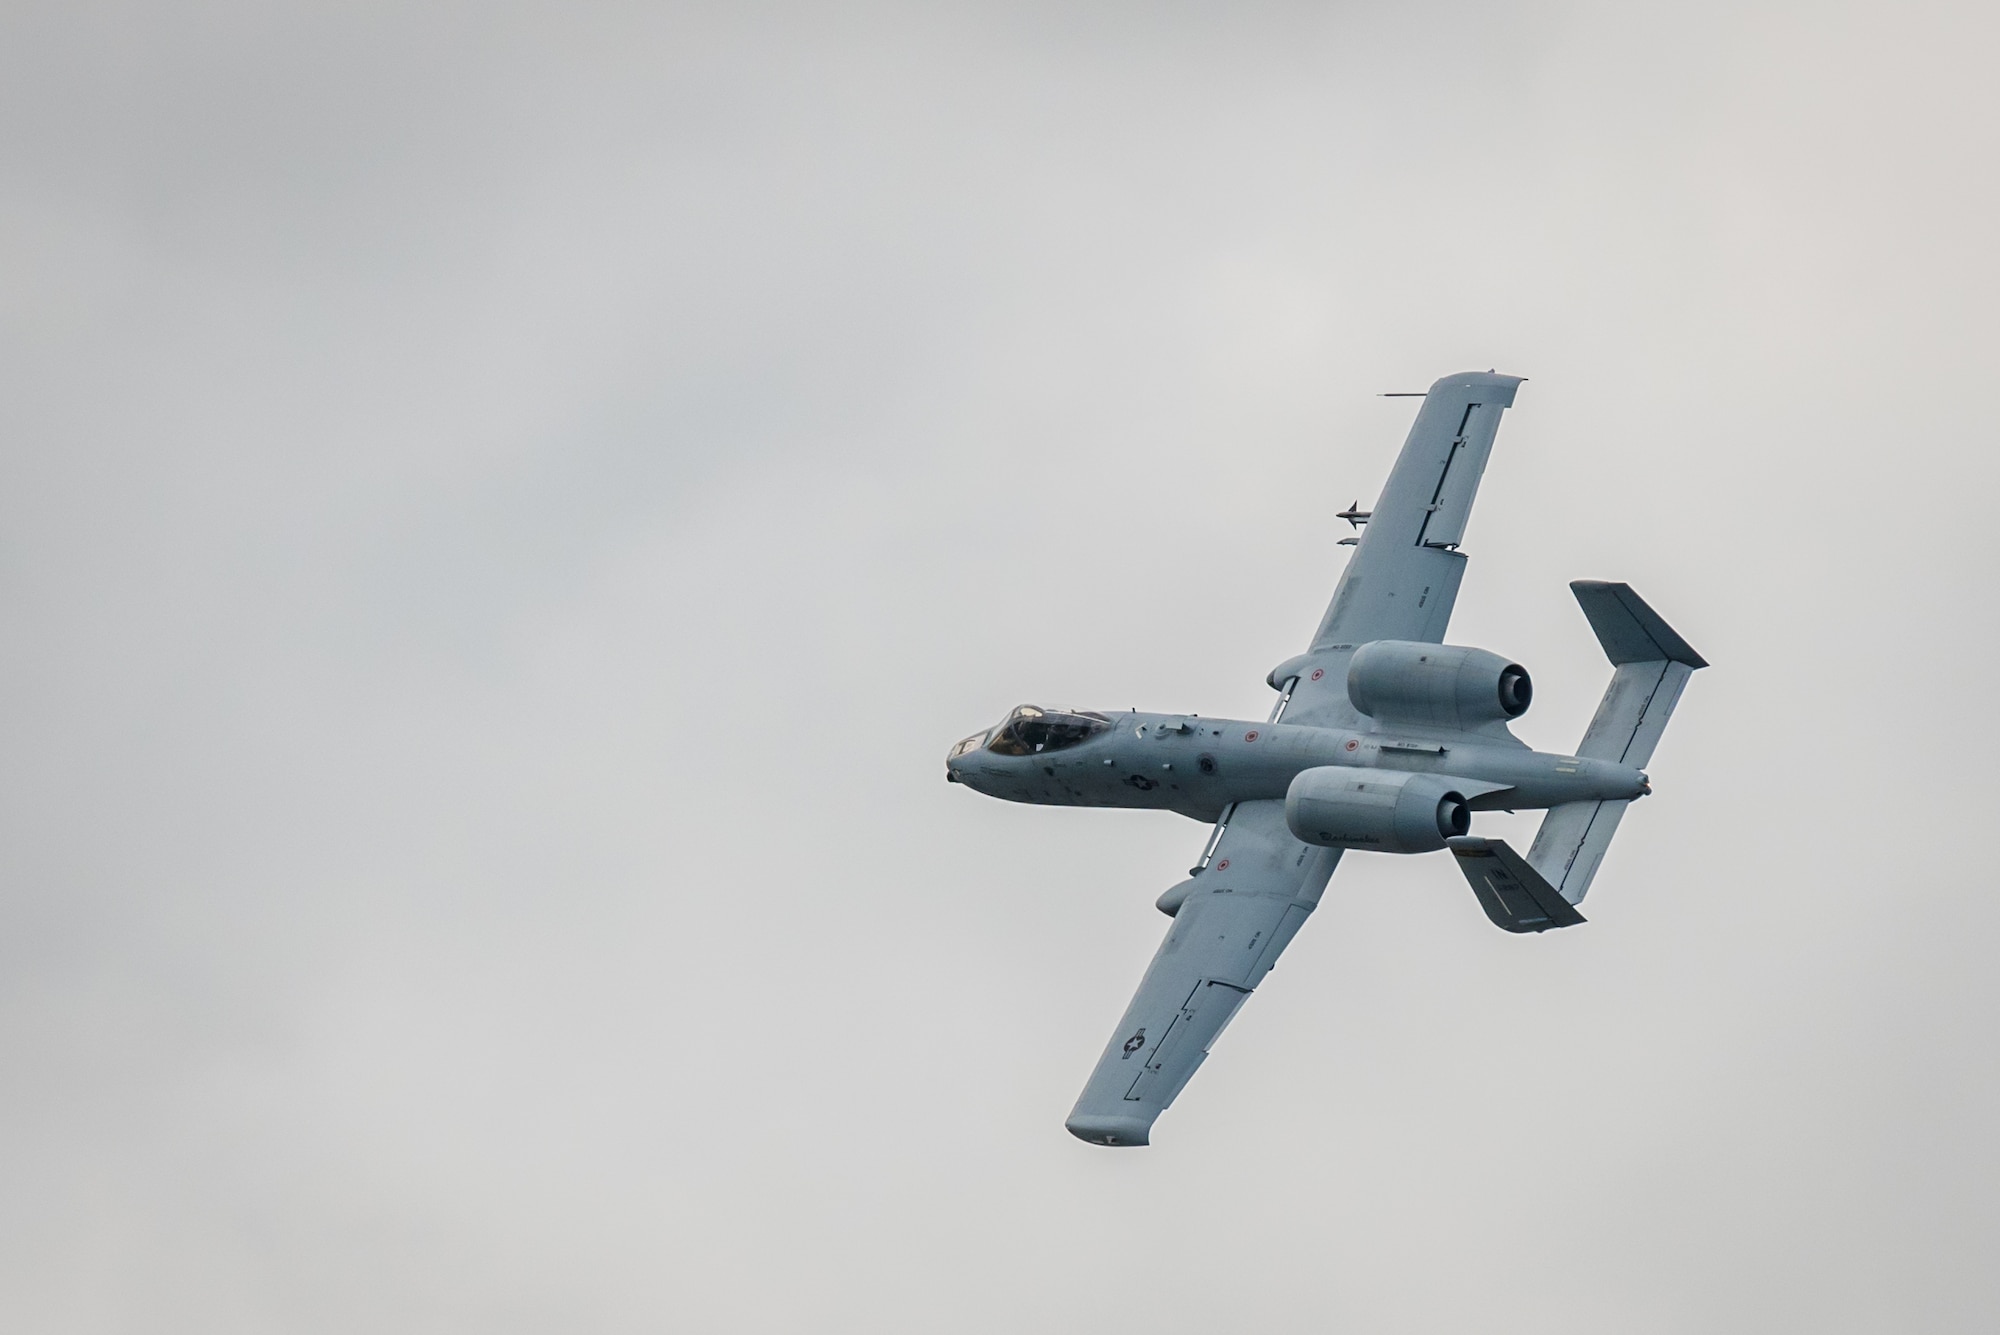 A U.S. Air Force A-10 Thunderbolt II aircraft flies an aerial demonstration over the Ohio River during the Thunder Over Louisville air show in Louisville, Ky., April 22, 2017. The Kentucky Air National Guard is once again providing logistical and maintenance support to military aircraft participating in the event, which has grown to become the largest annual single-day air show in America. (U.S. Air National Guard photo by Lt. Col. Dale Greer)